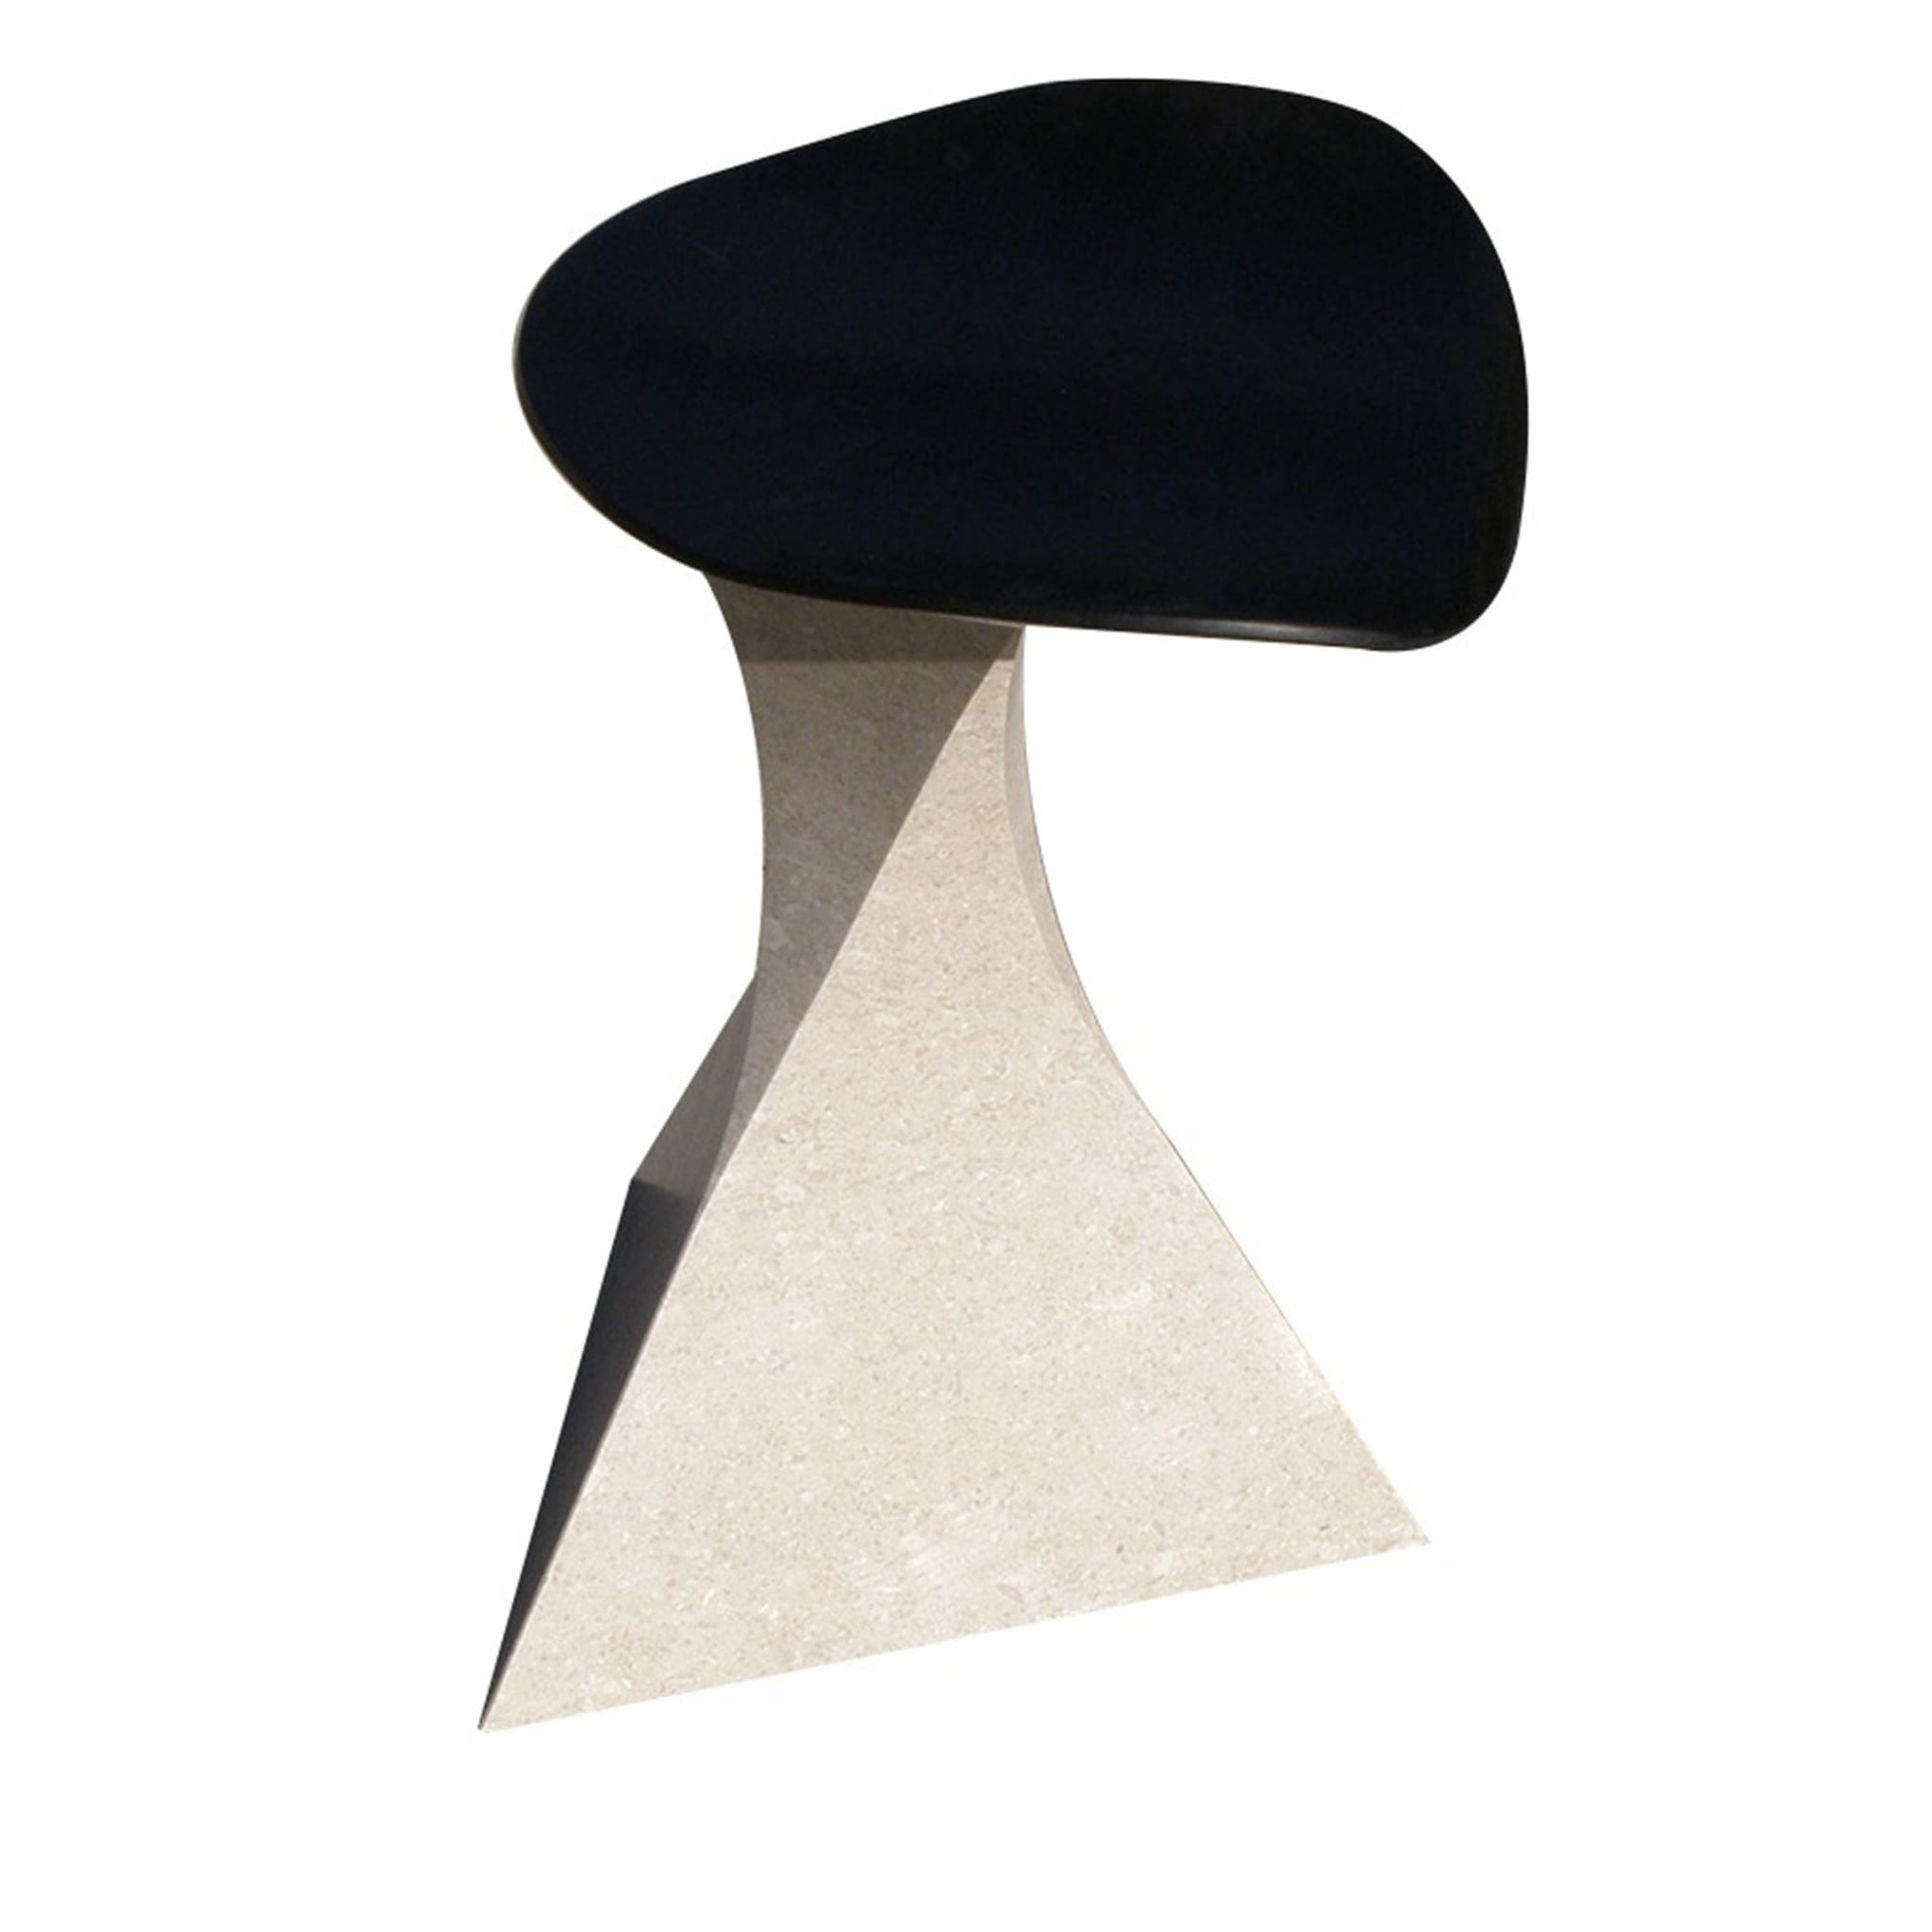 Audrey Black Stool by Mauro Dell'Orco - Main view